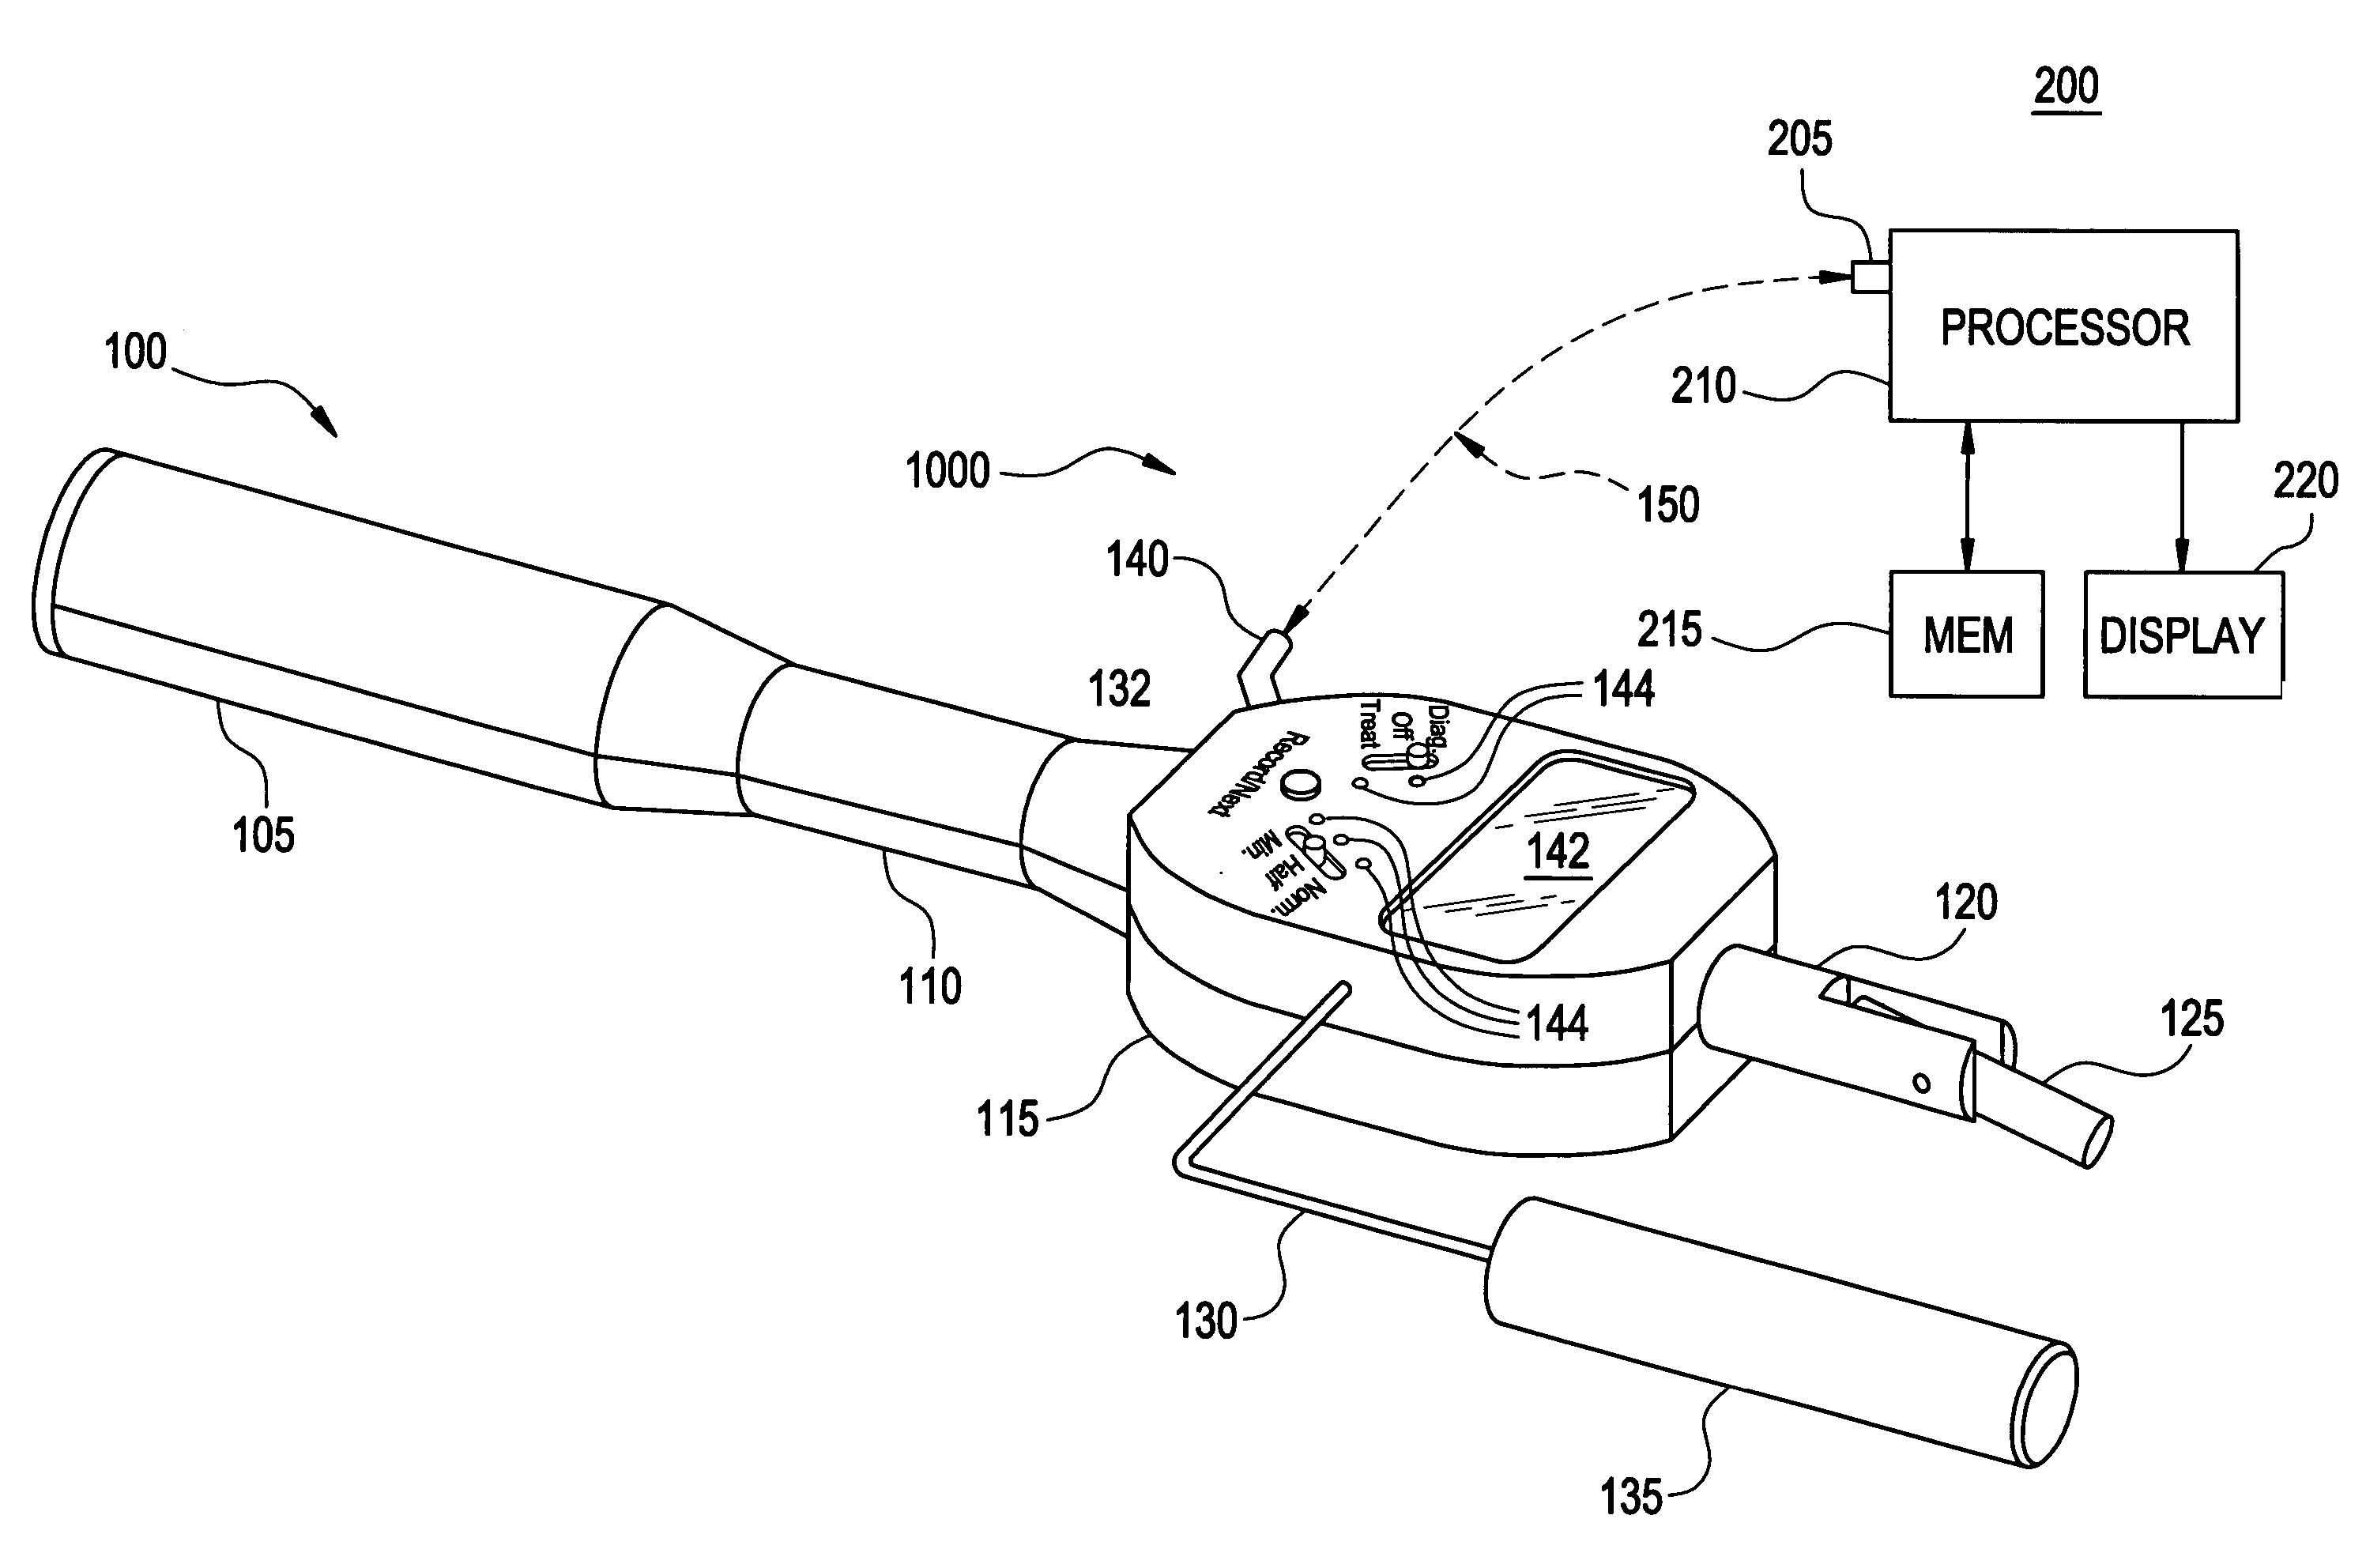 Electronic acupuncture device and system, and method of managing meridian energy balance data of a patient